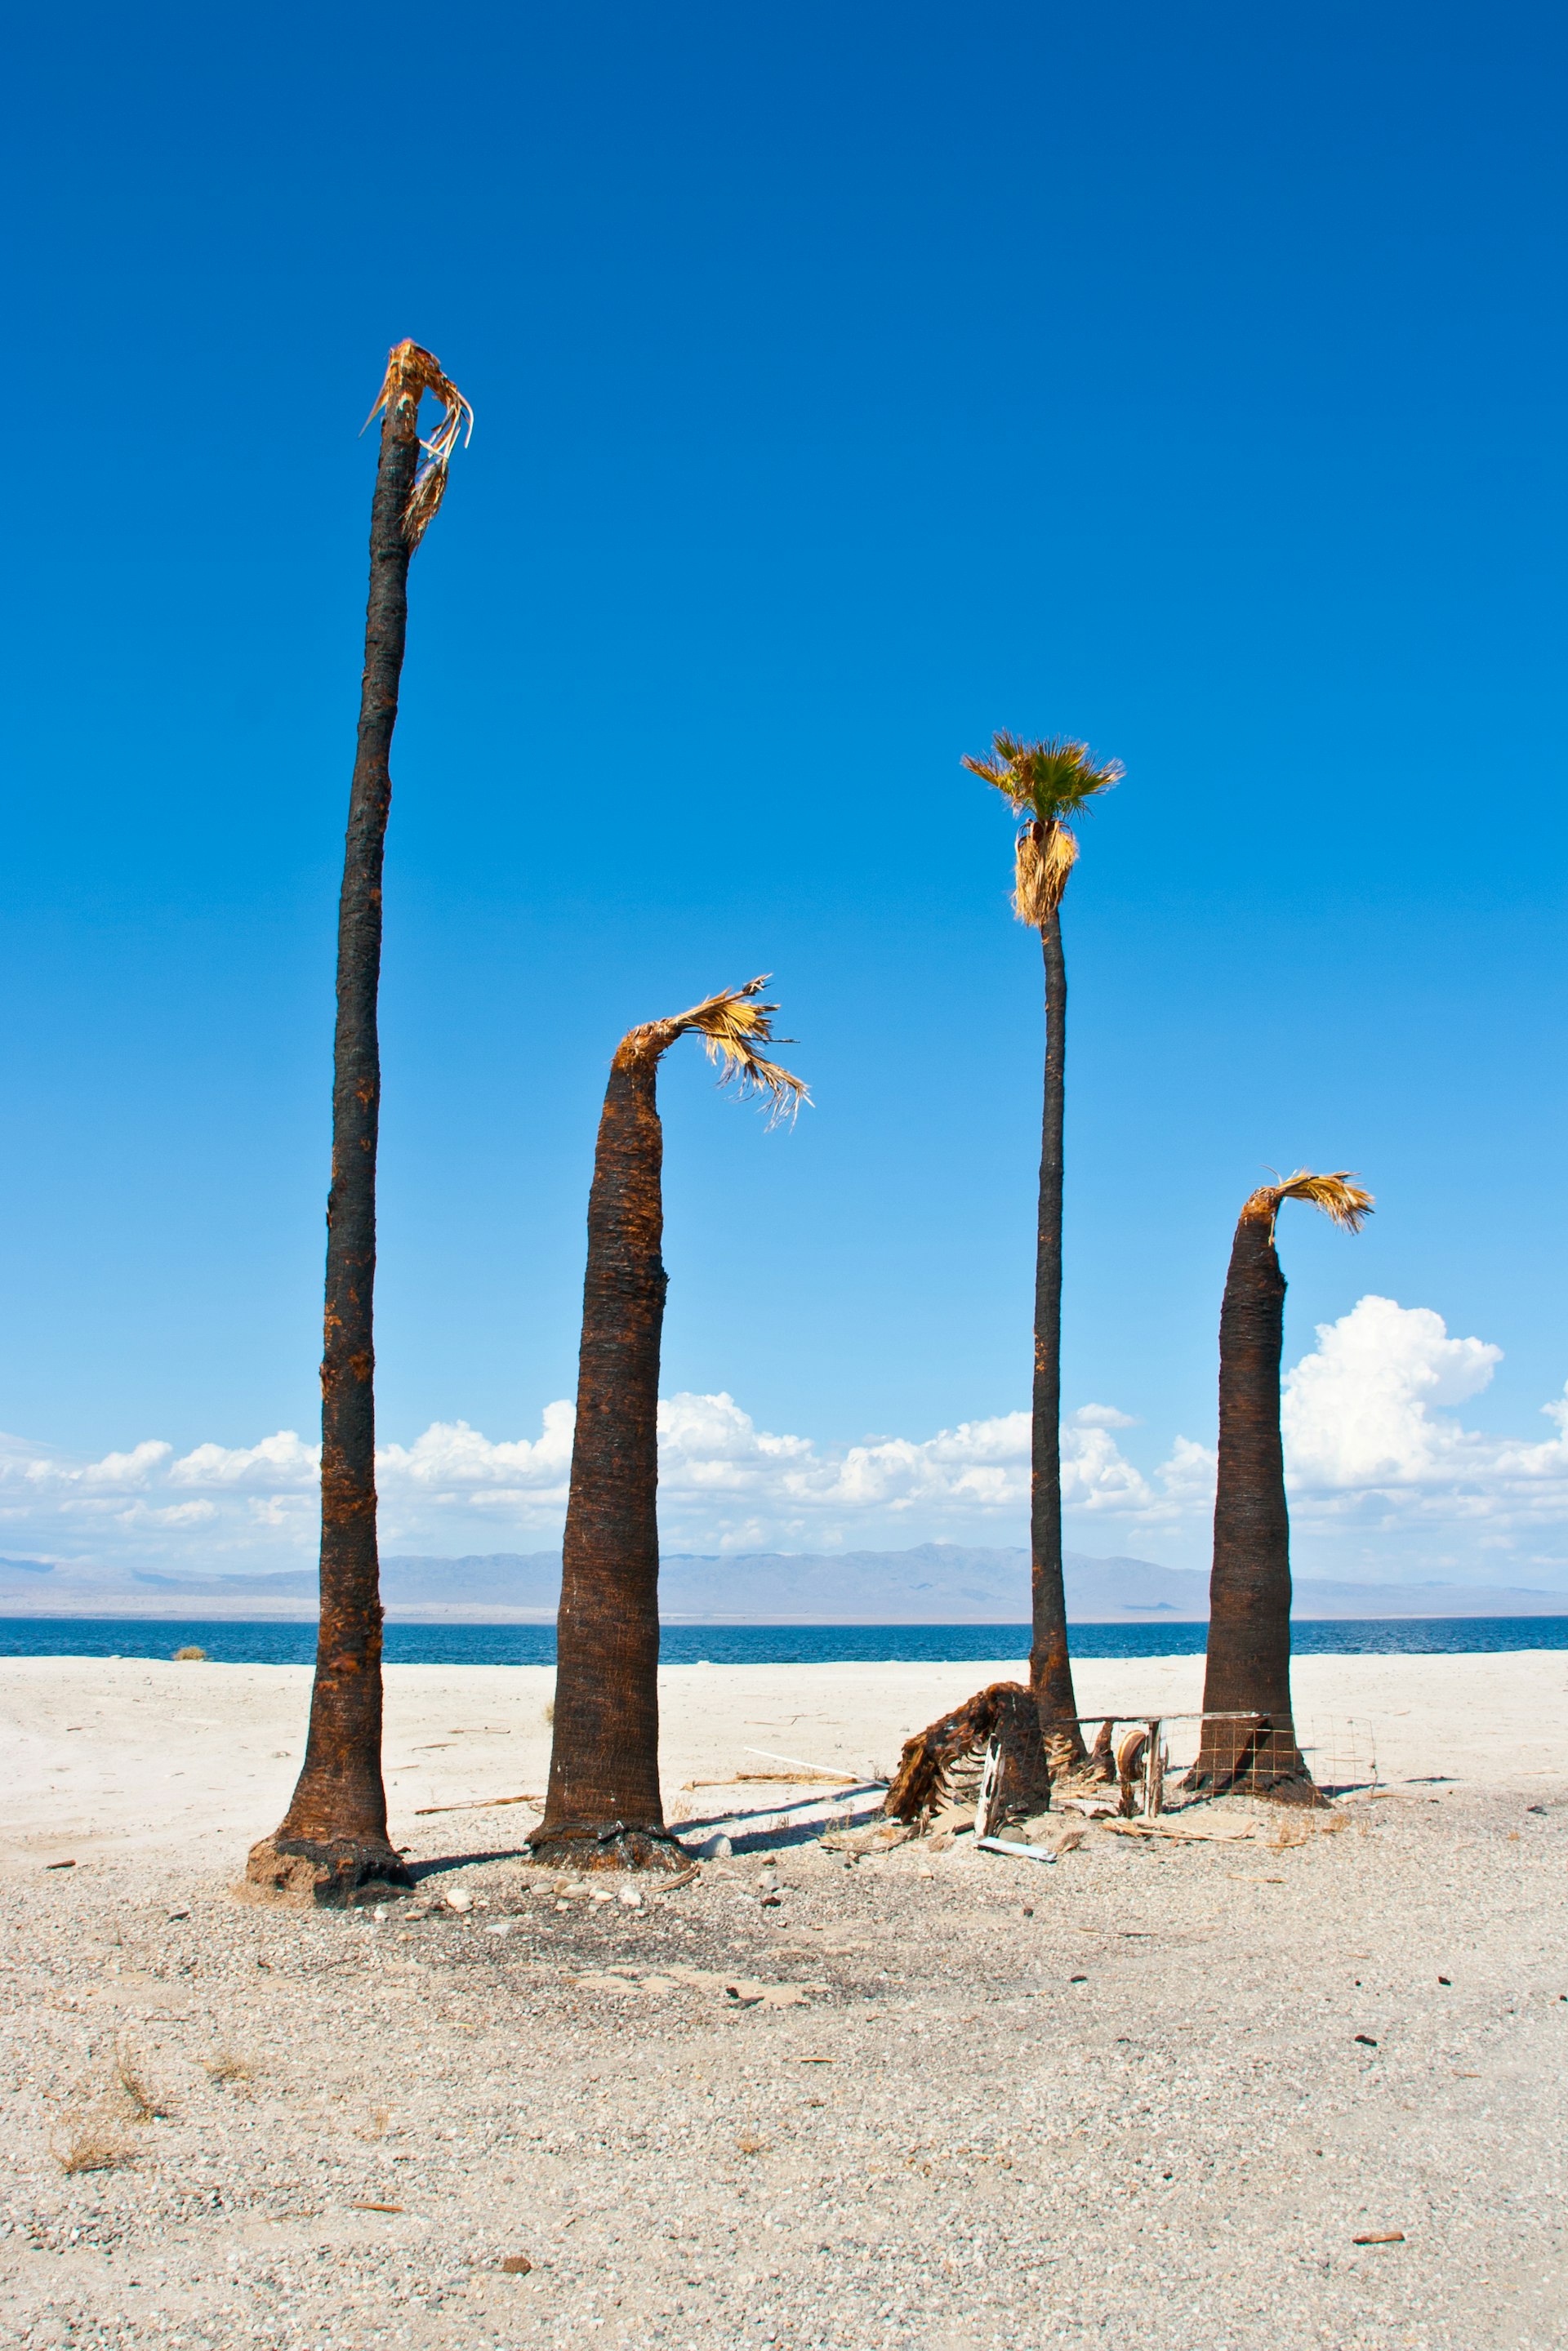 Blue skies and dead palm trees on the shore of a desert lake in Salton Sea © Kevin Key / Shutterstock